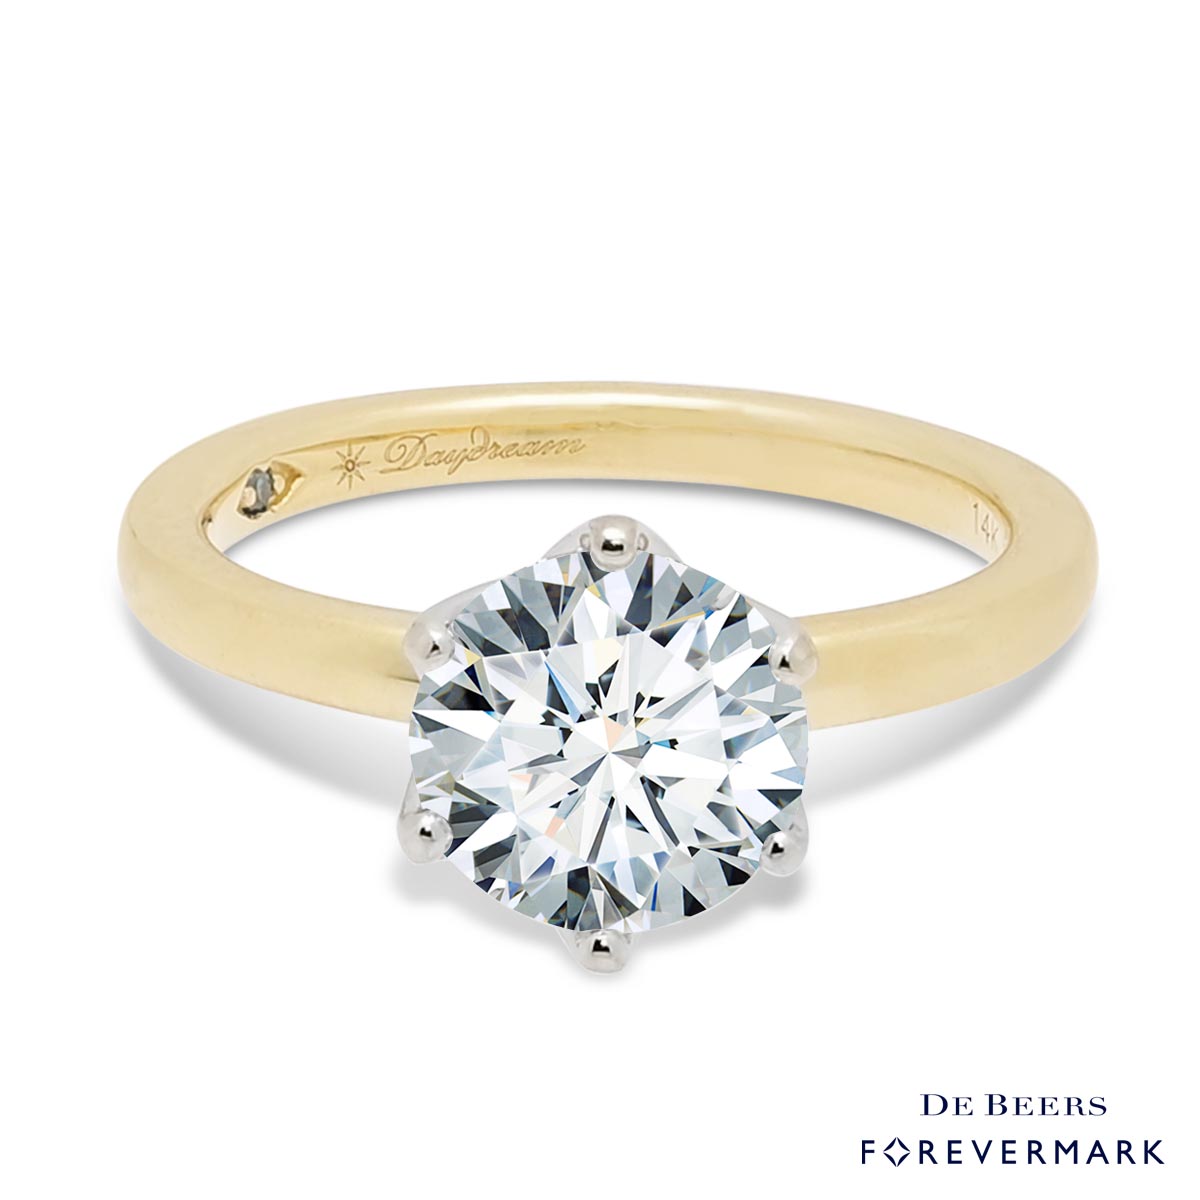 De Beers Forevermark Diamond Solitaire Engagement Ring in 14kt Yellow and White Gold (2ct tw)